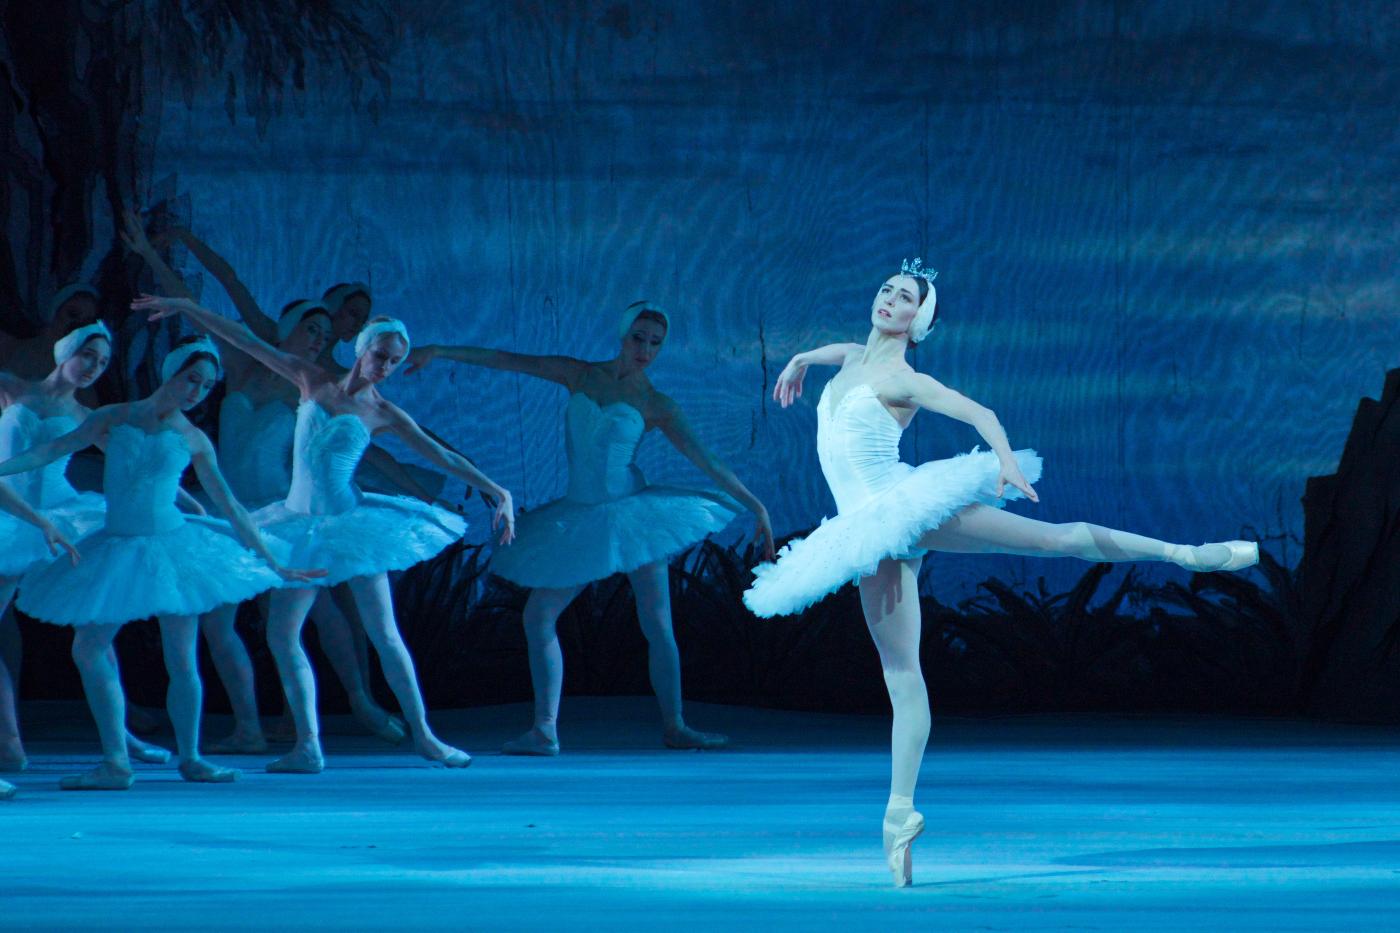 12. K.Ryzhkova (Odette) and ensemble, “Swan Lake” by V.Burmeister and L.Ivanov, Ballet of the Stanislavsky and Nemirovich-Danchenko Moscow Music Theatre 2023 © Stanislavsky and Nemirovich-Danchenko Moscow Music Theatre 